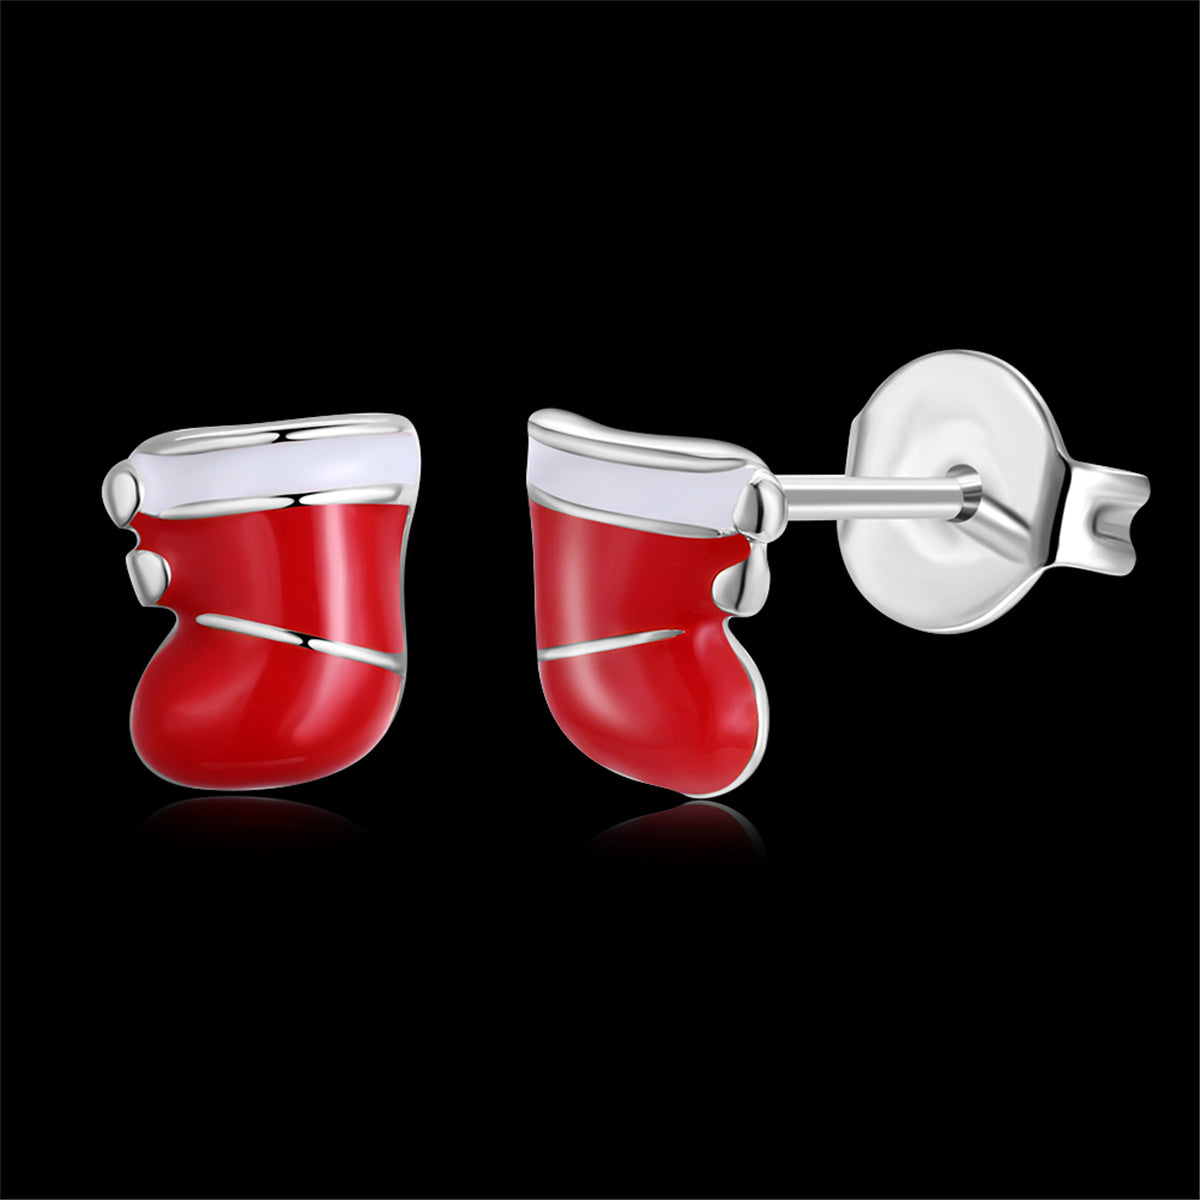 Red Enamel & Silver-Plated Christmas Stocking Stud Earrings